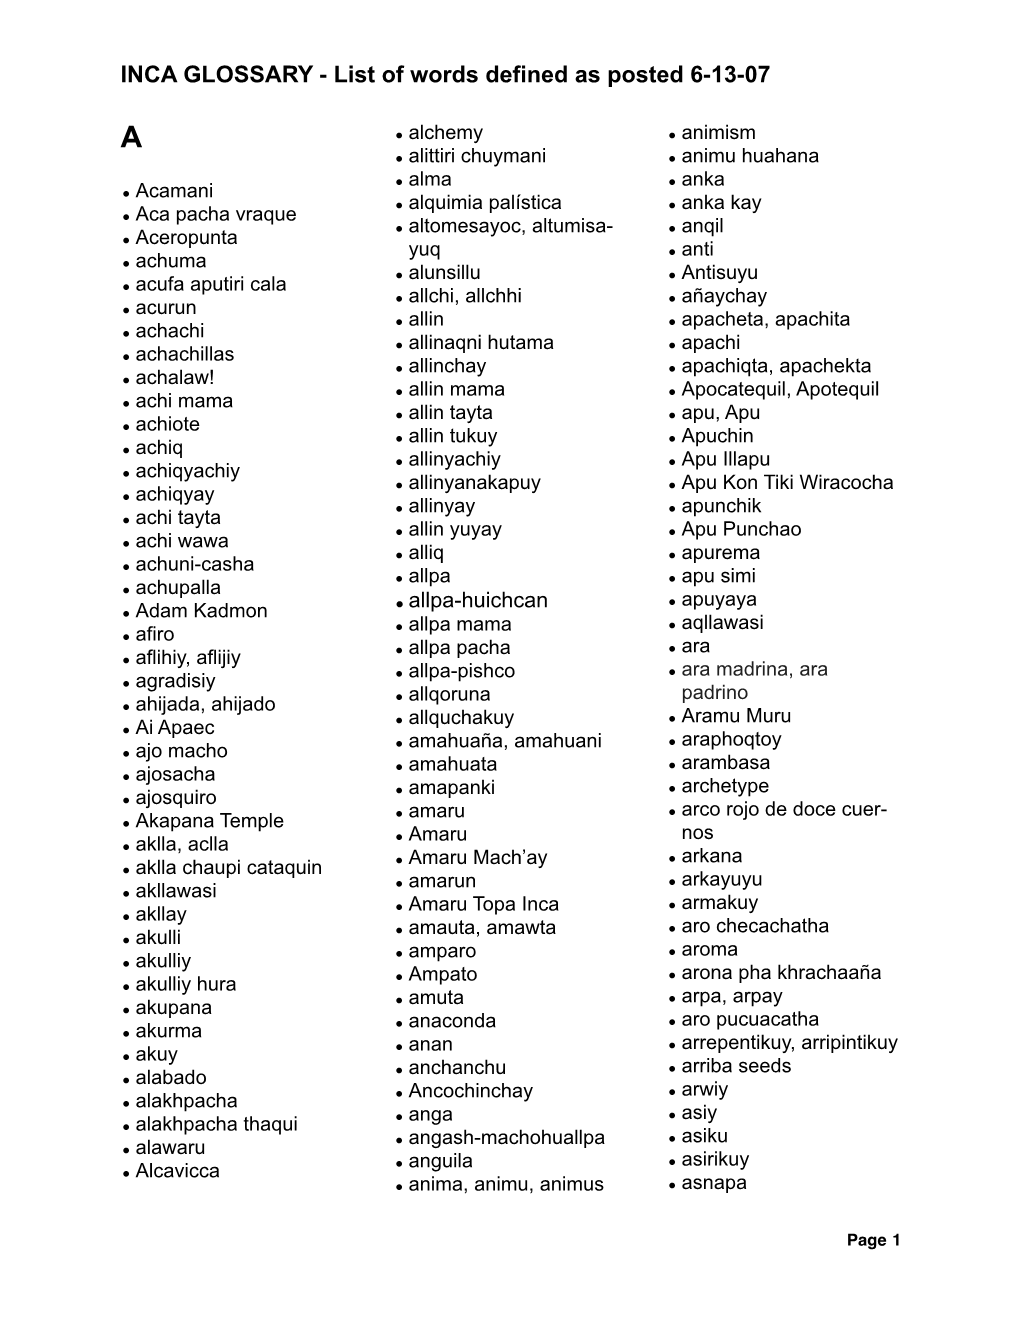 INCA GLOSSARY - List of Words Defined As Posted 6-13-07